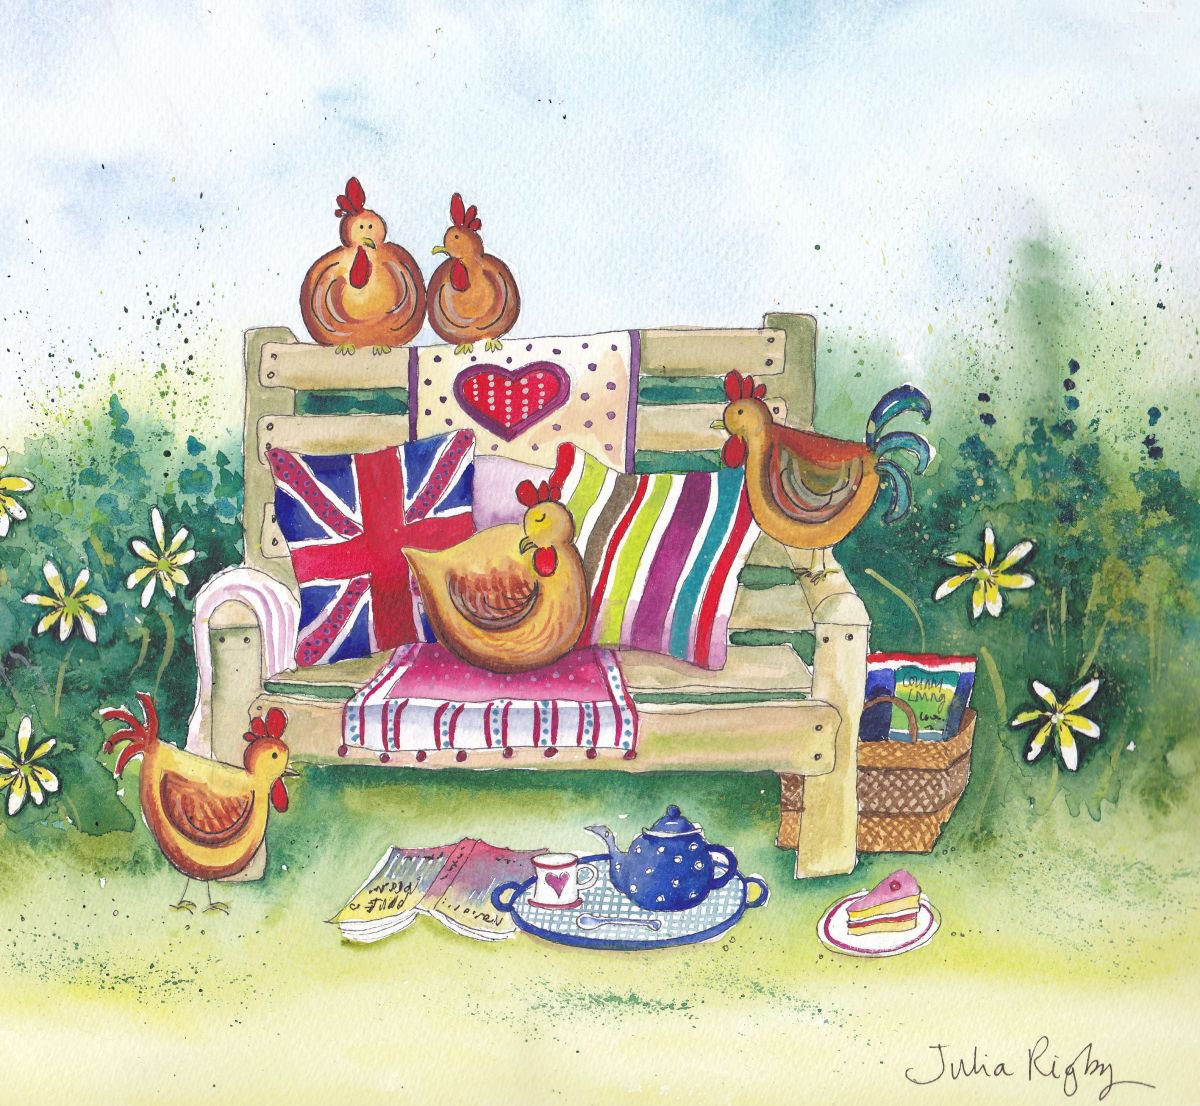 Tea on the Bench by Julia Rigby